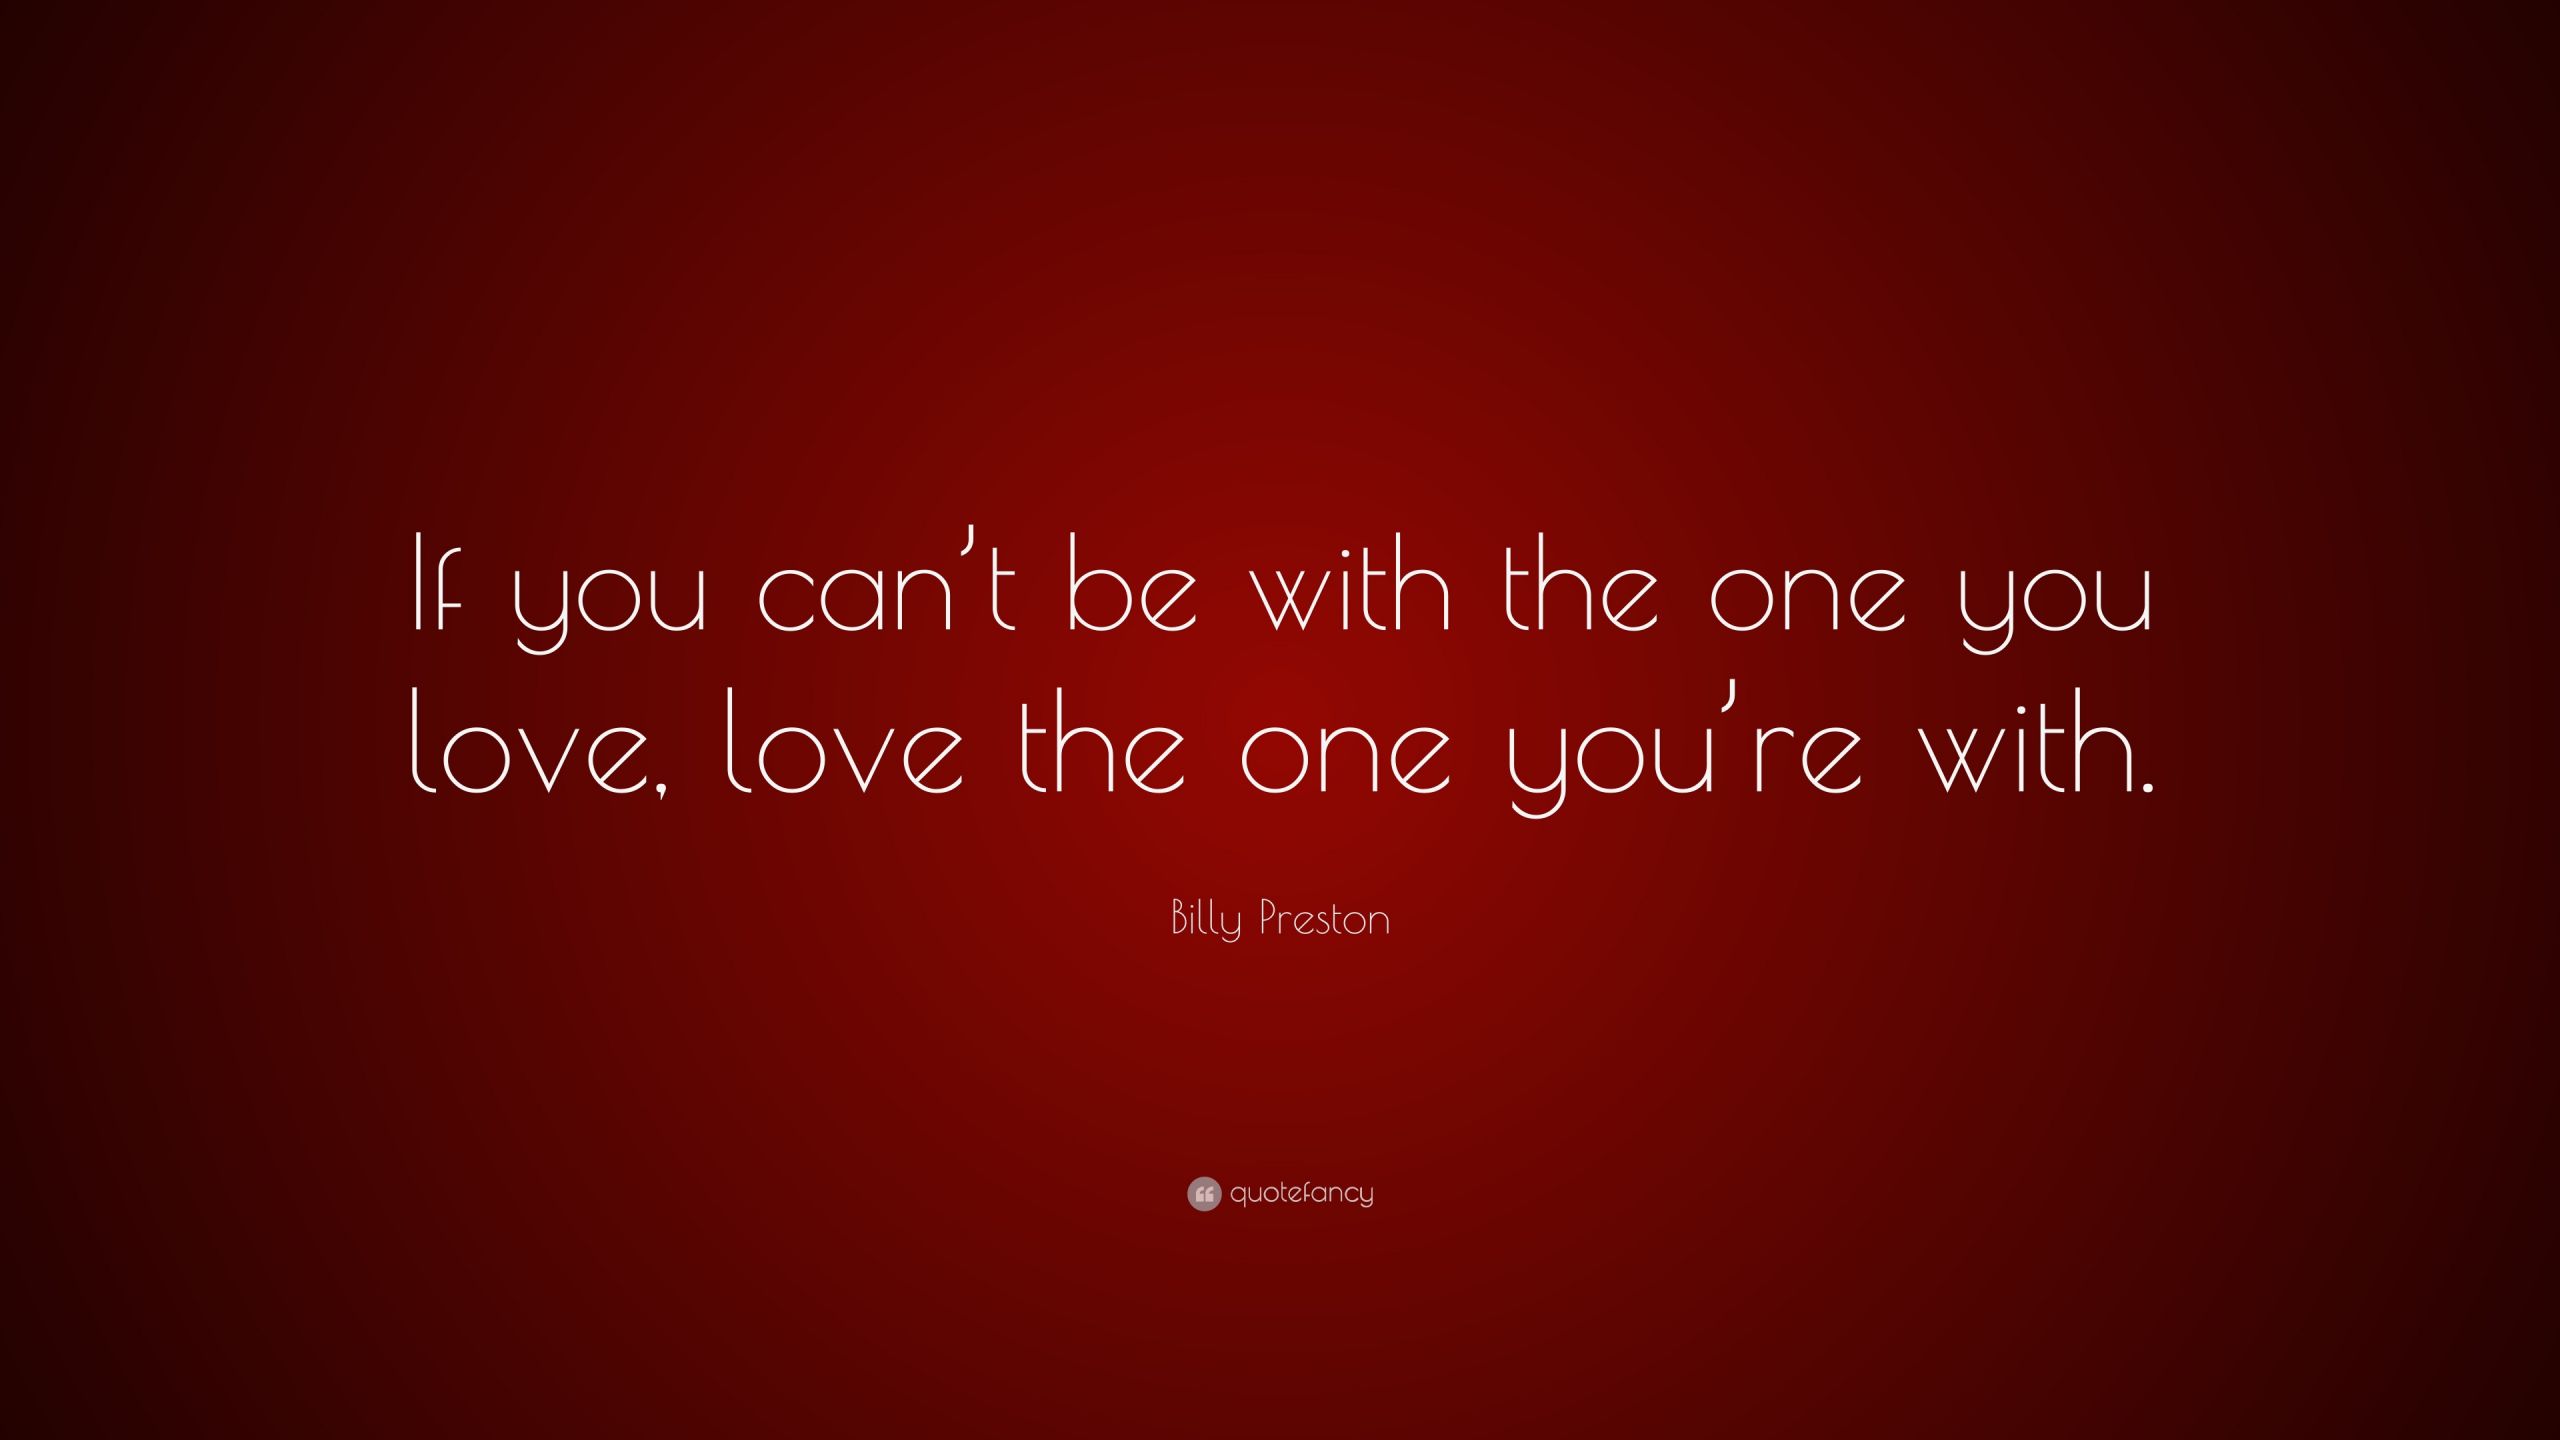 Quotes For The One You Love
 Billy Preston Quote “If you can’t be with the one you